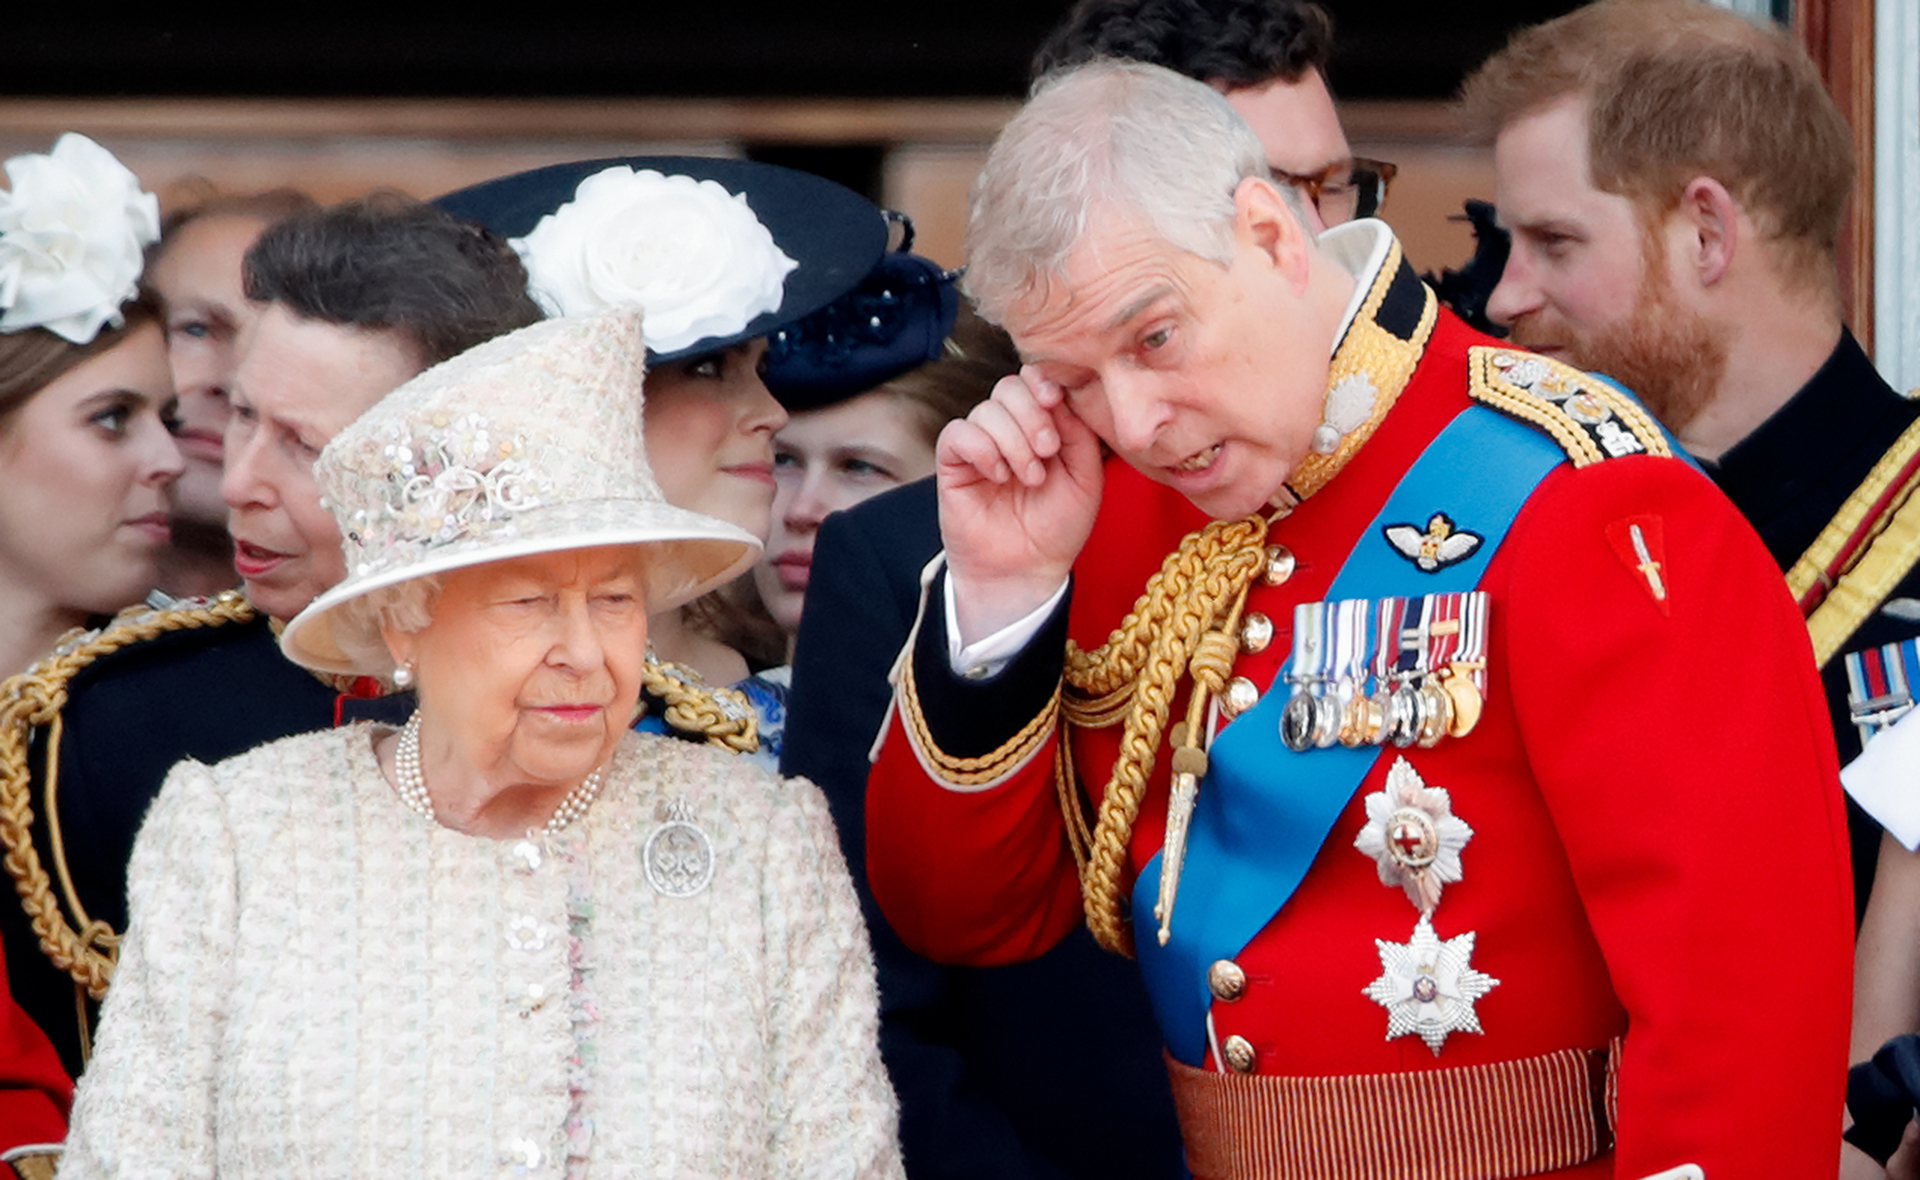 EXCLUSIVE: Will the Queen strip Prince Andrew of this title over latest sexual abuse court developments?